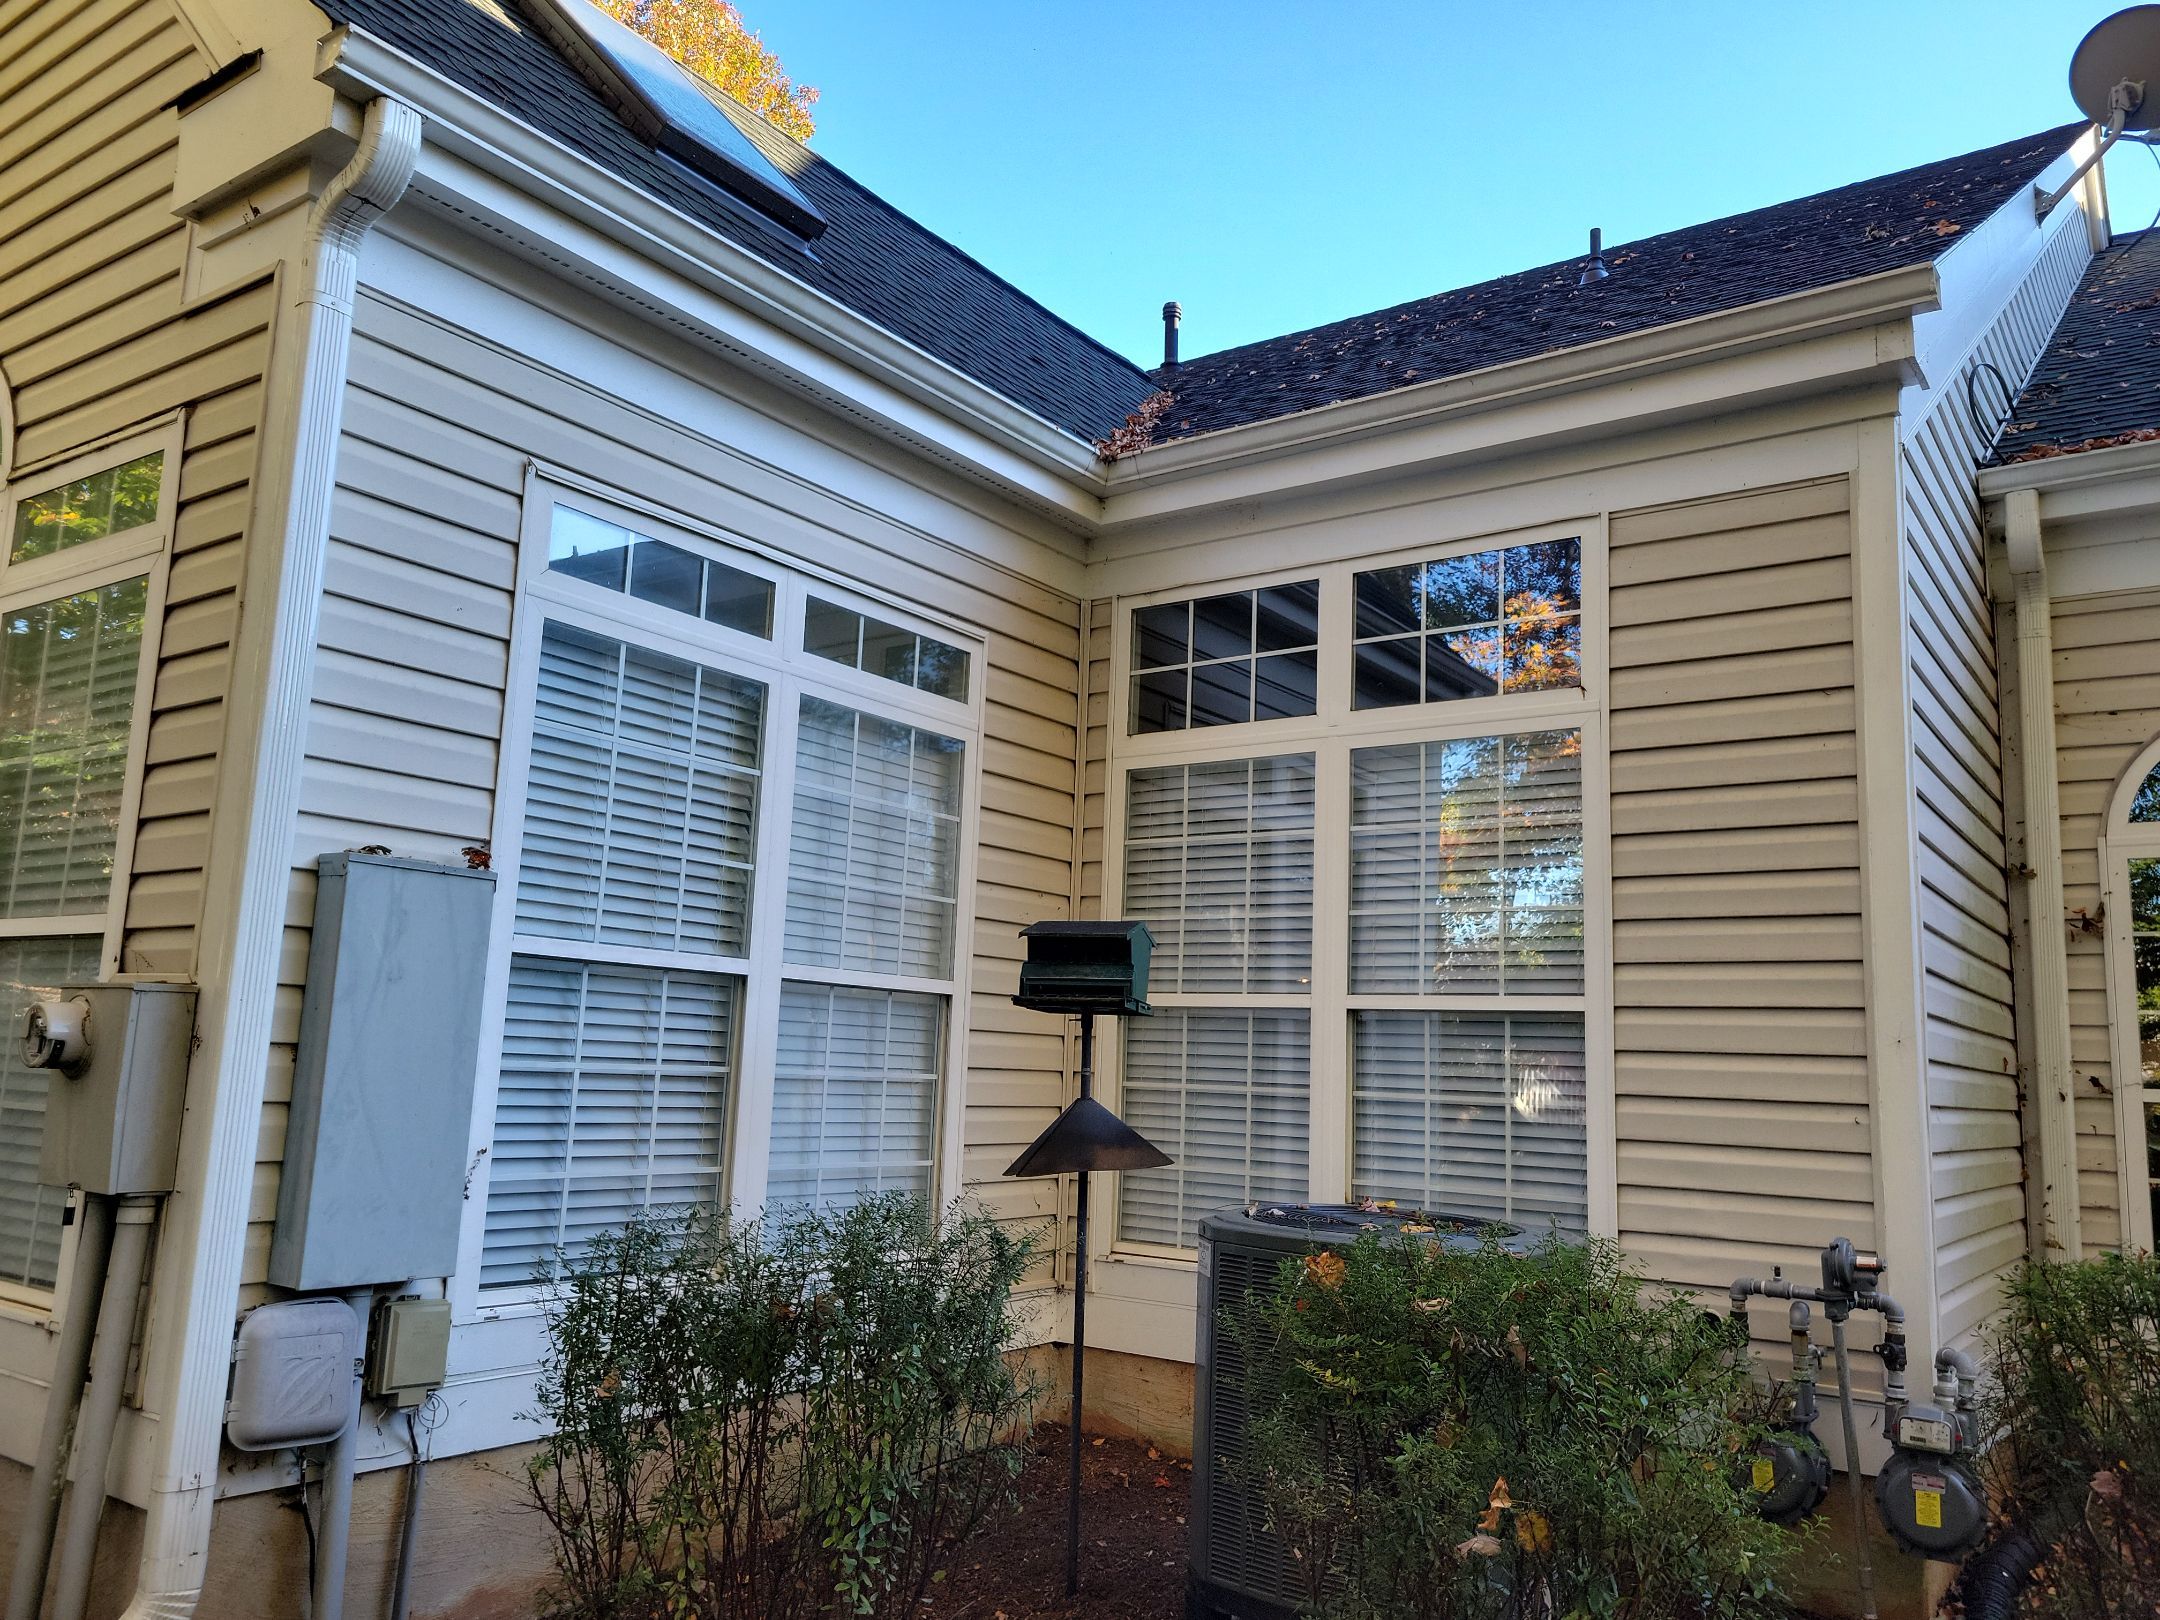 Gutter Cleaning and Window Cleaning in Charlottesville, VA